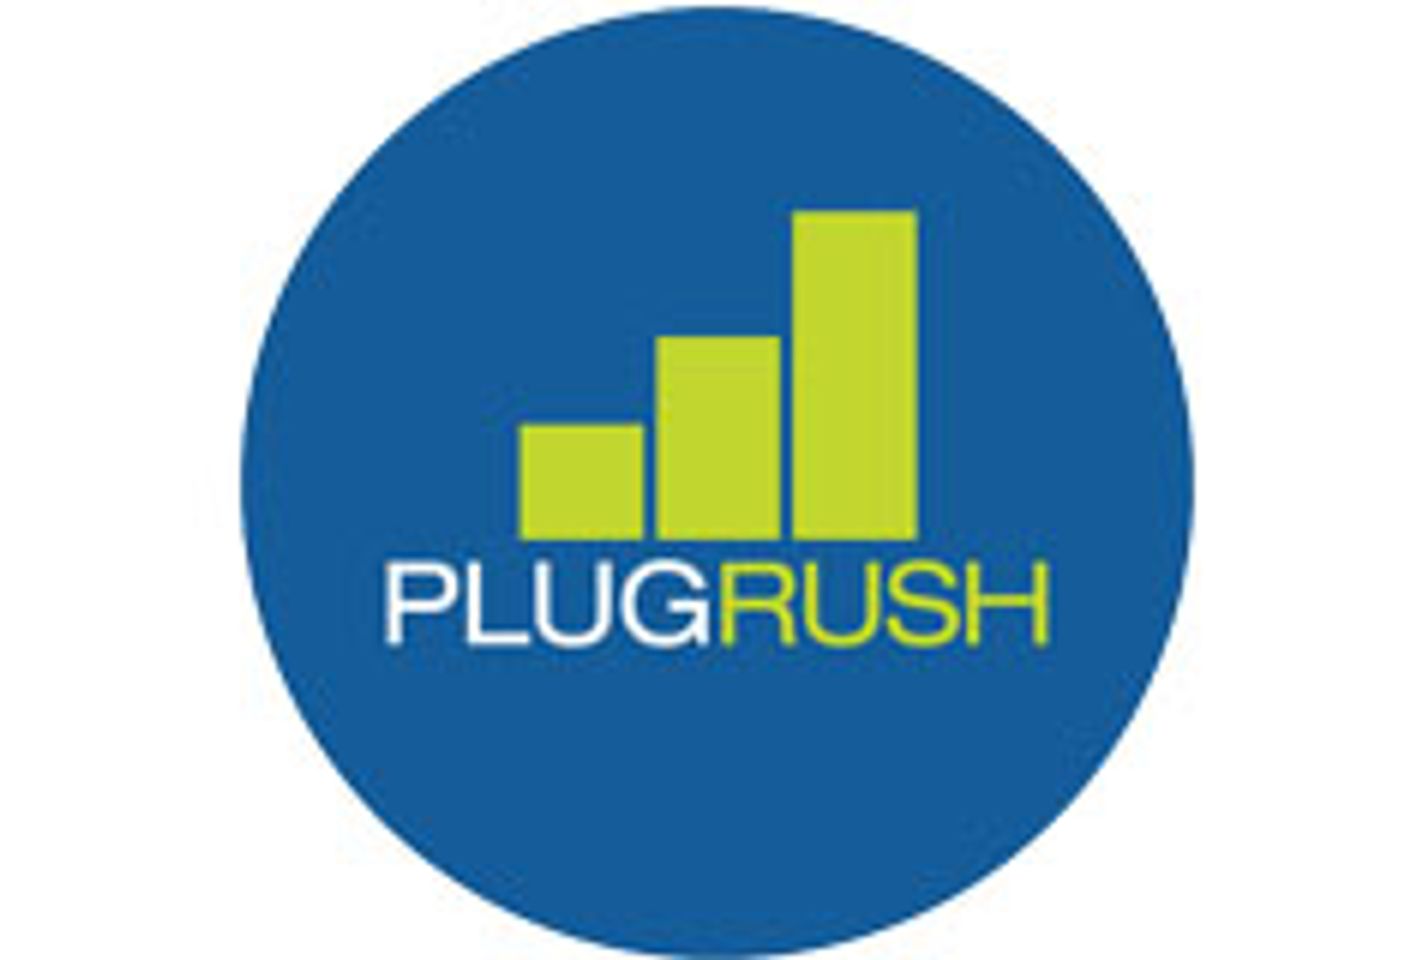 PlugRush Launches New Website, Drops Minimum To 10 Cents CPM For Rest Of Month